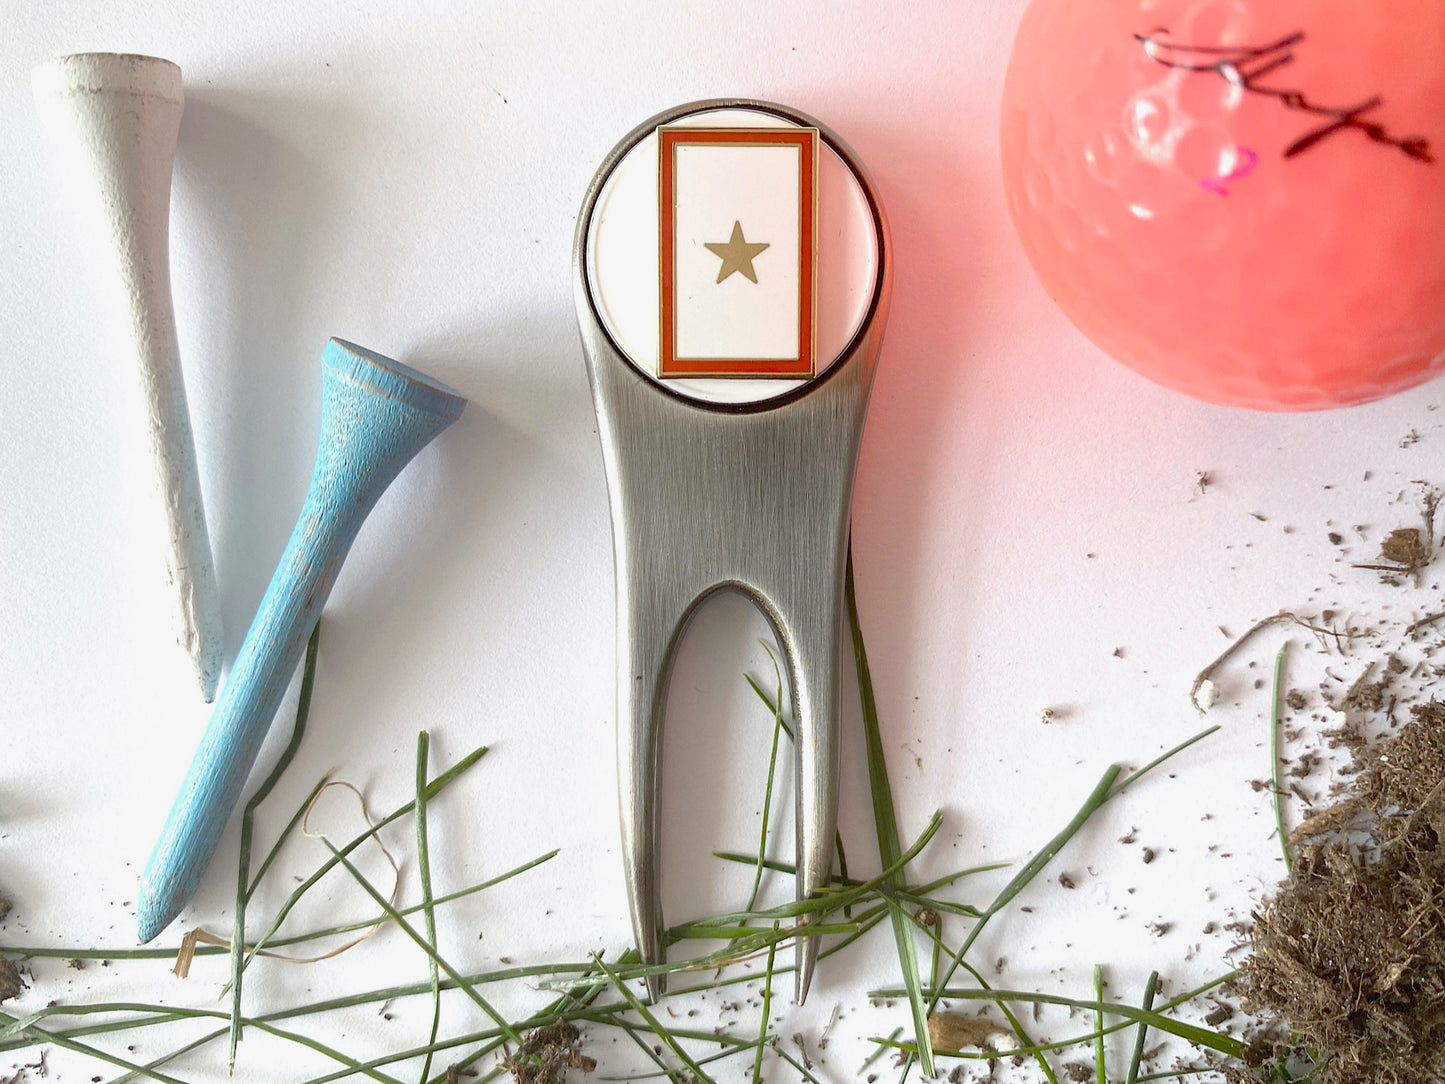 Gold Star Divot Tool and Ball Marker